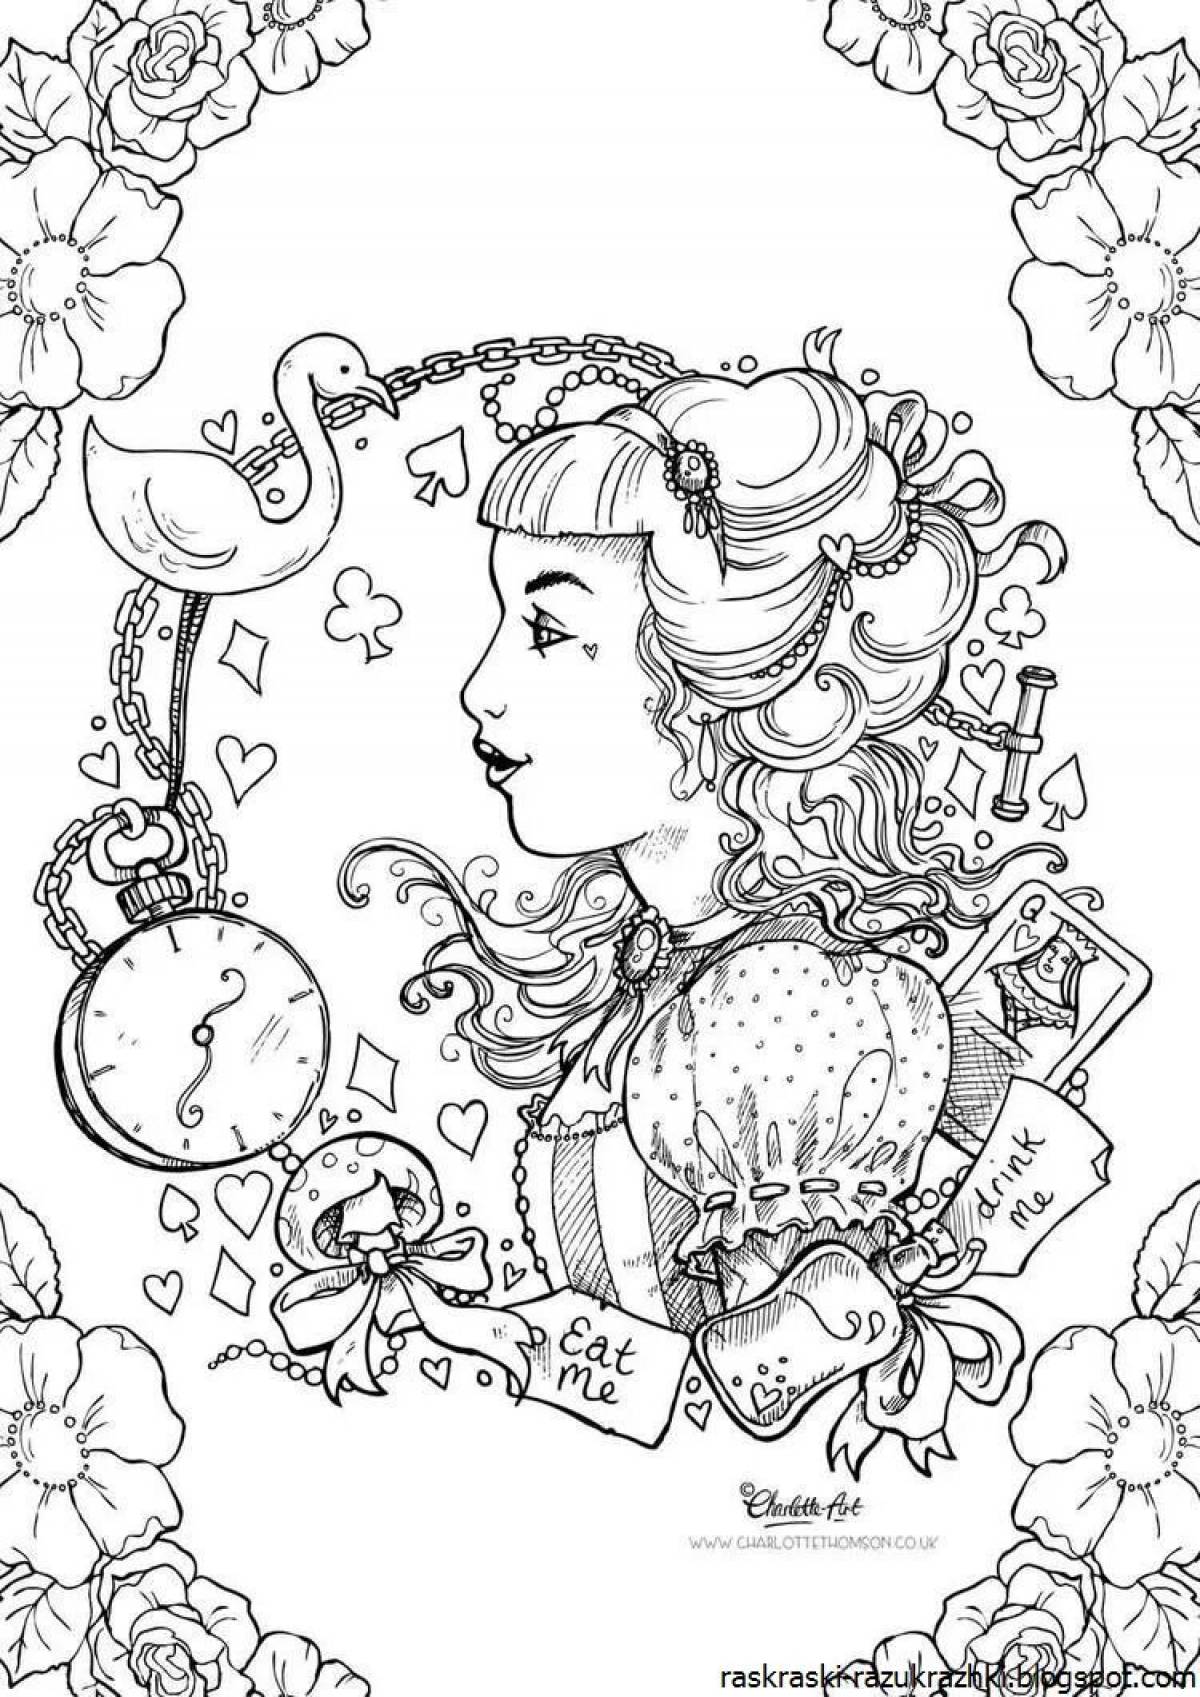 Bewitching alice coloring book